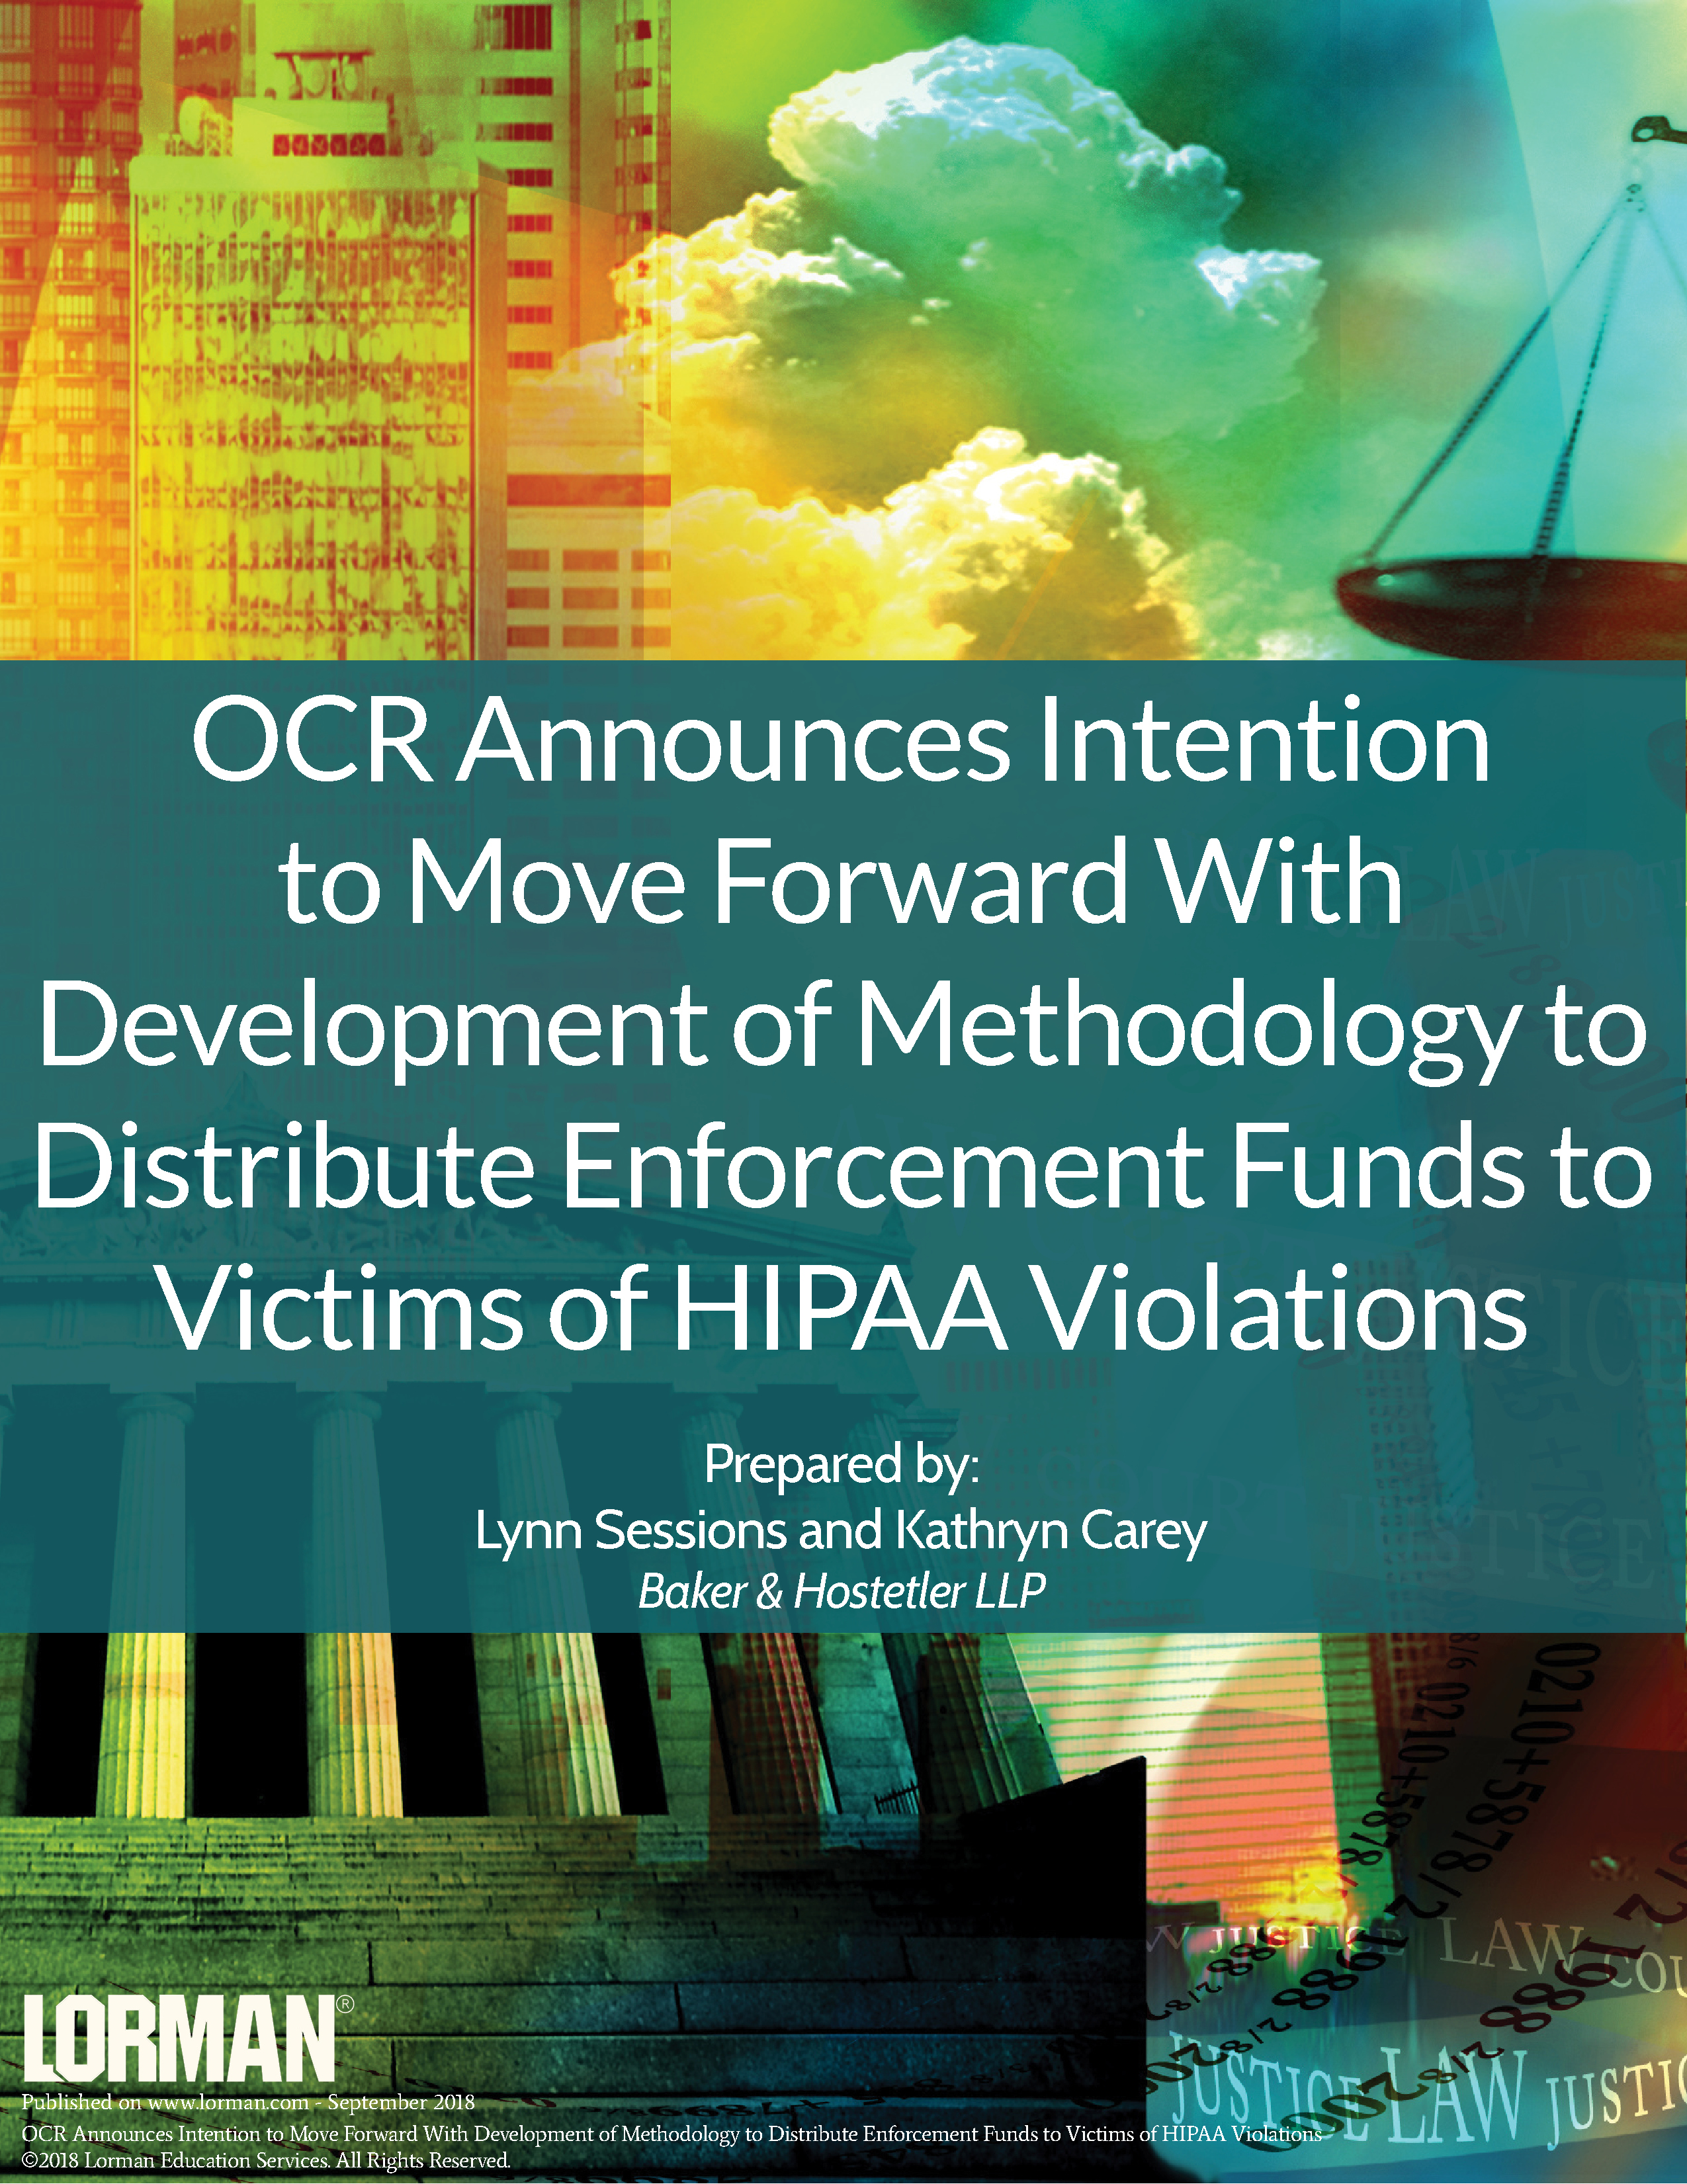 OCR Intends to Move Forward With Methodology to Distribute Enforcement Funds to HIPAA Victims